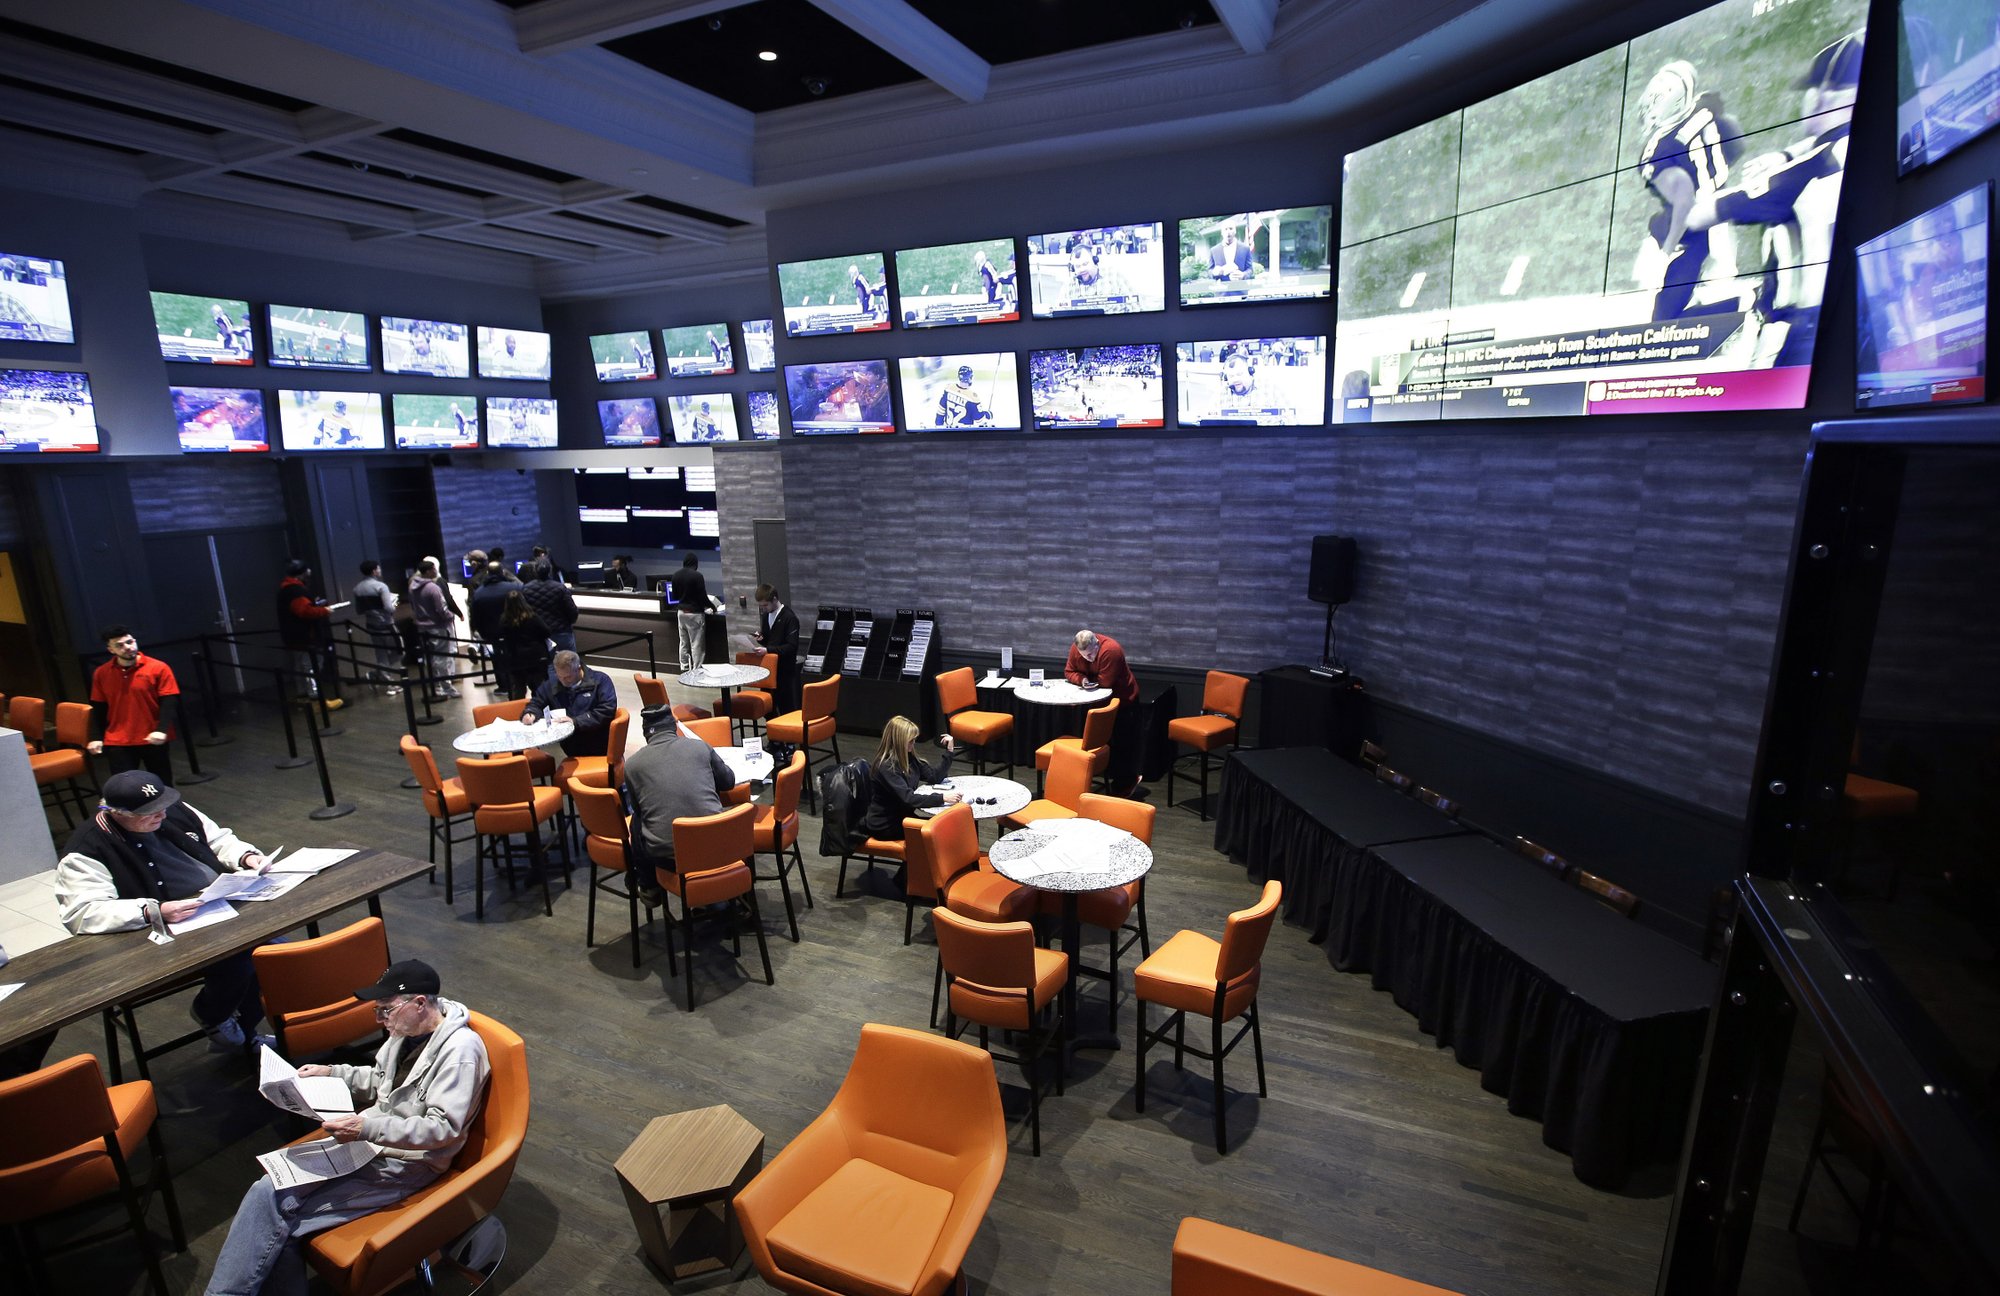 Rhode Island Sportsbooks Lose $900K in February to Fall Further Behind Optimistic Projections